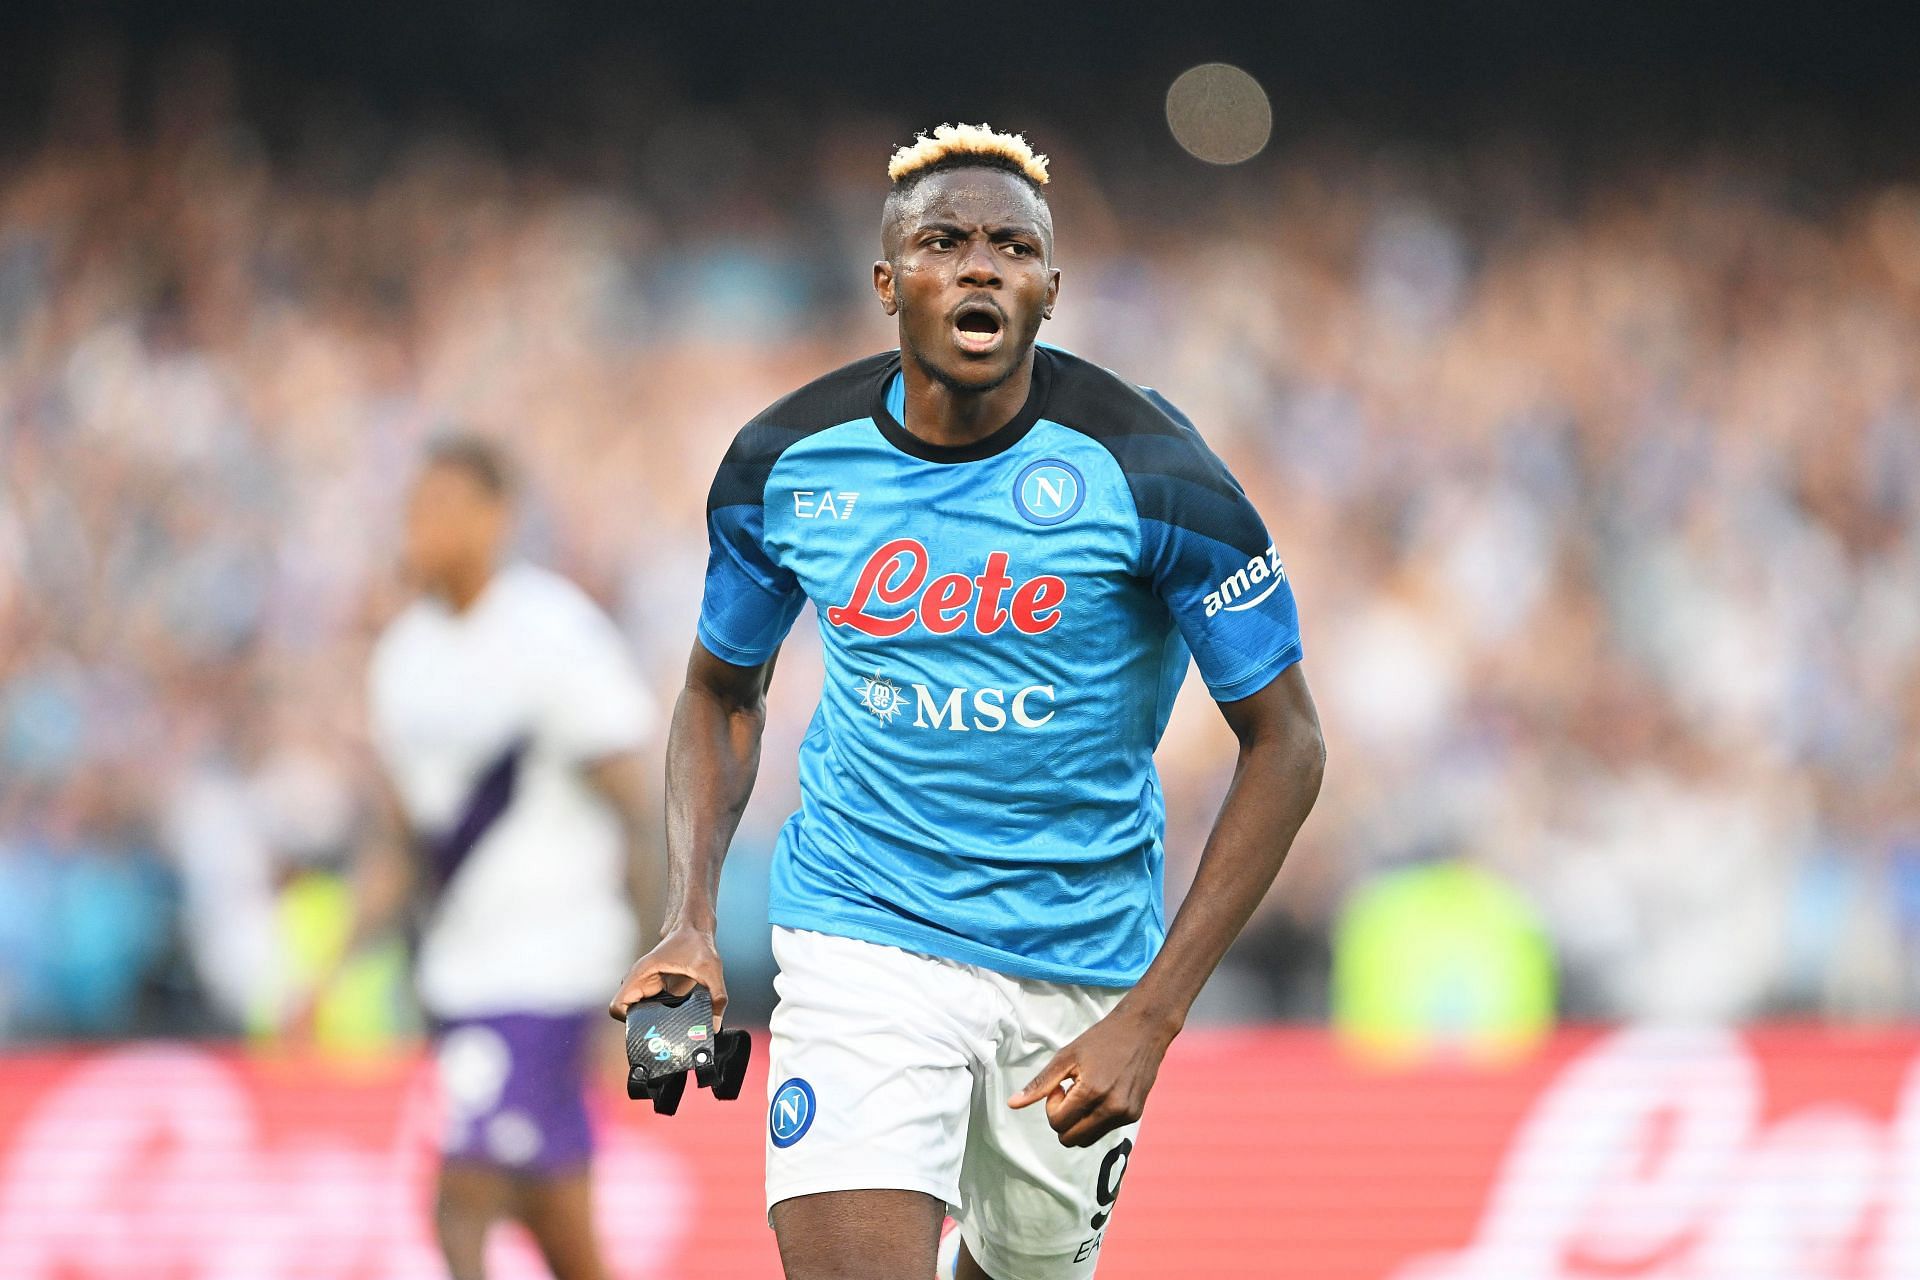 Osimhen fired Napoli to their first league title since 1990